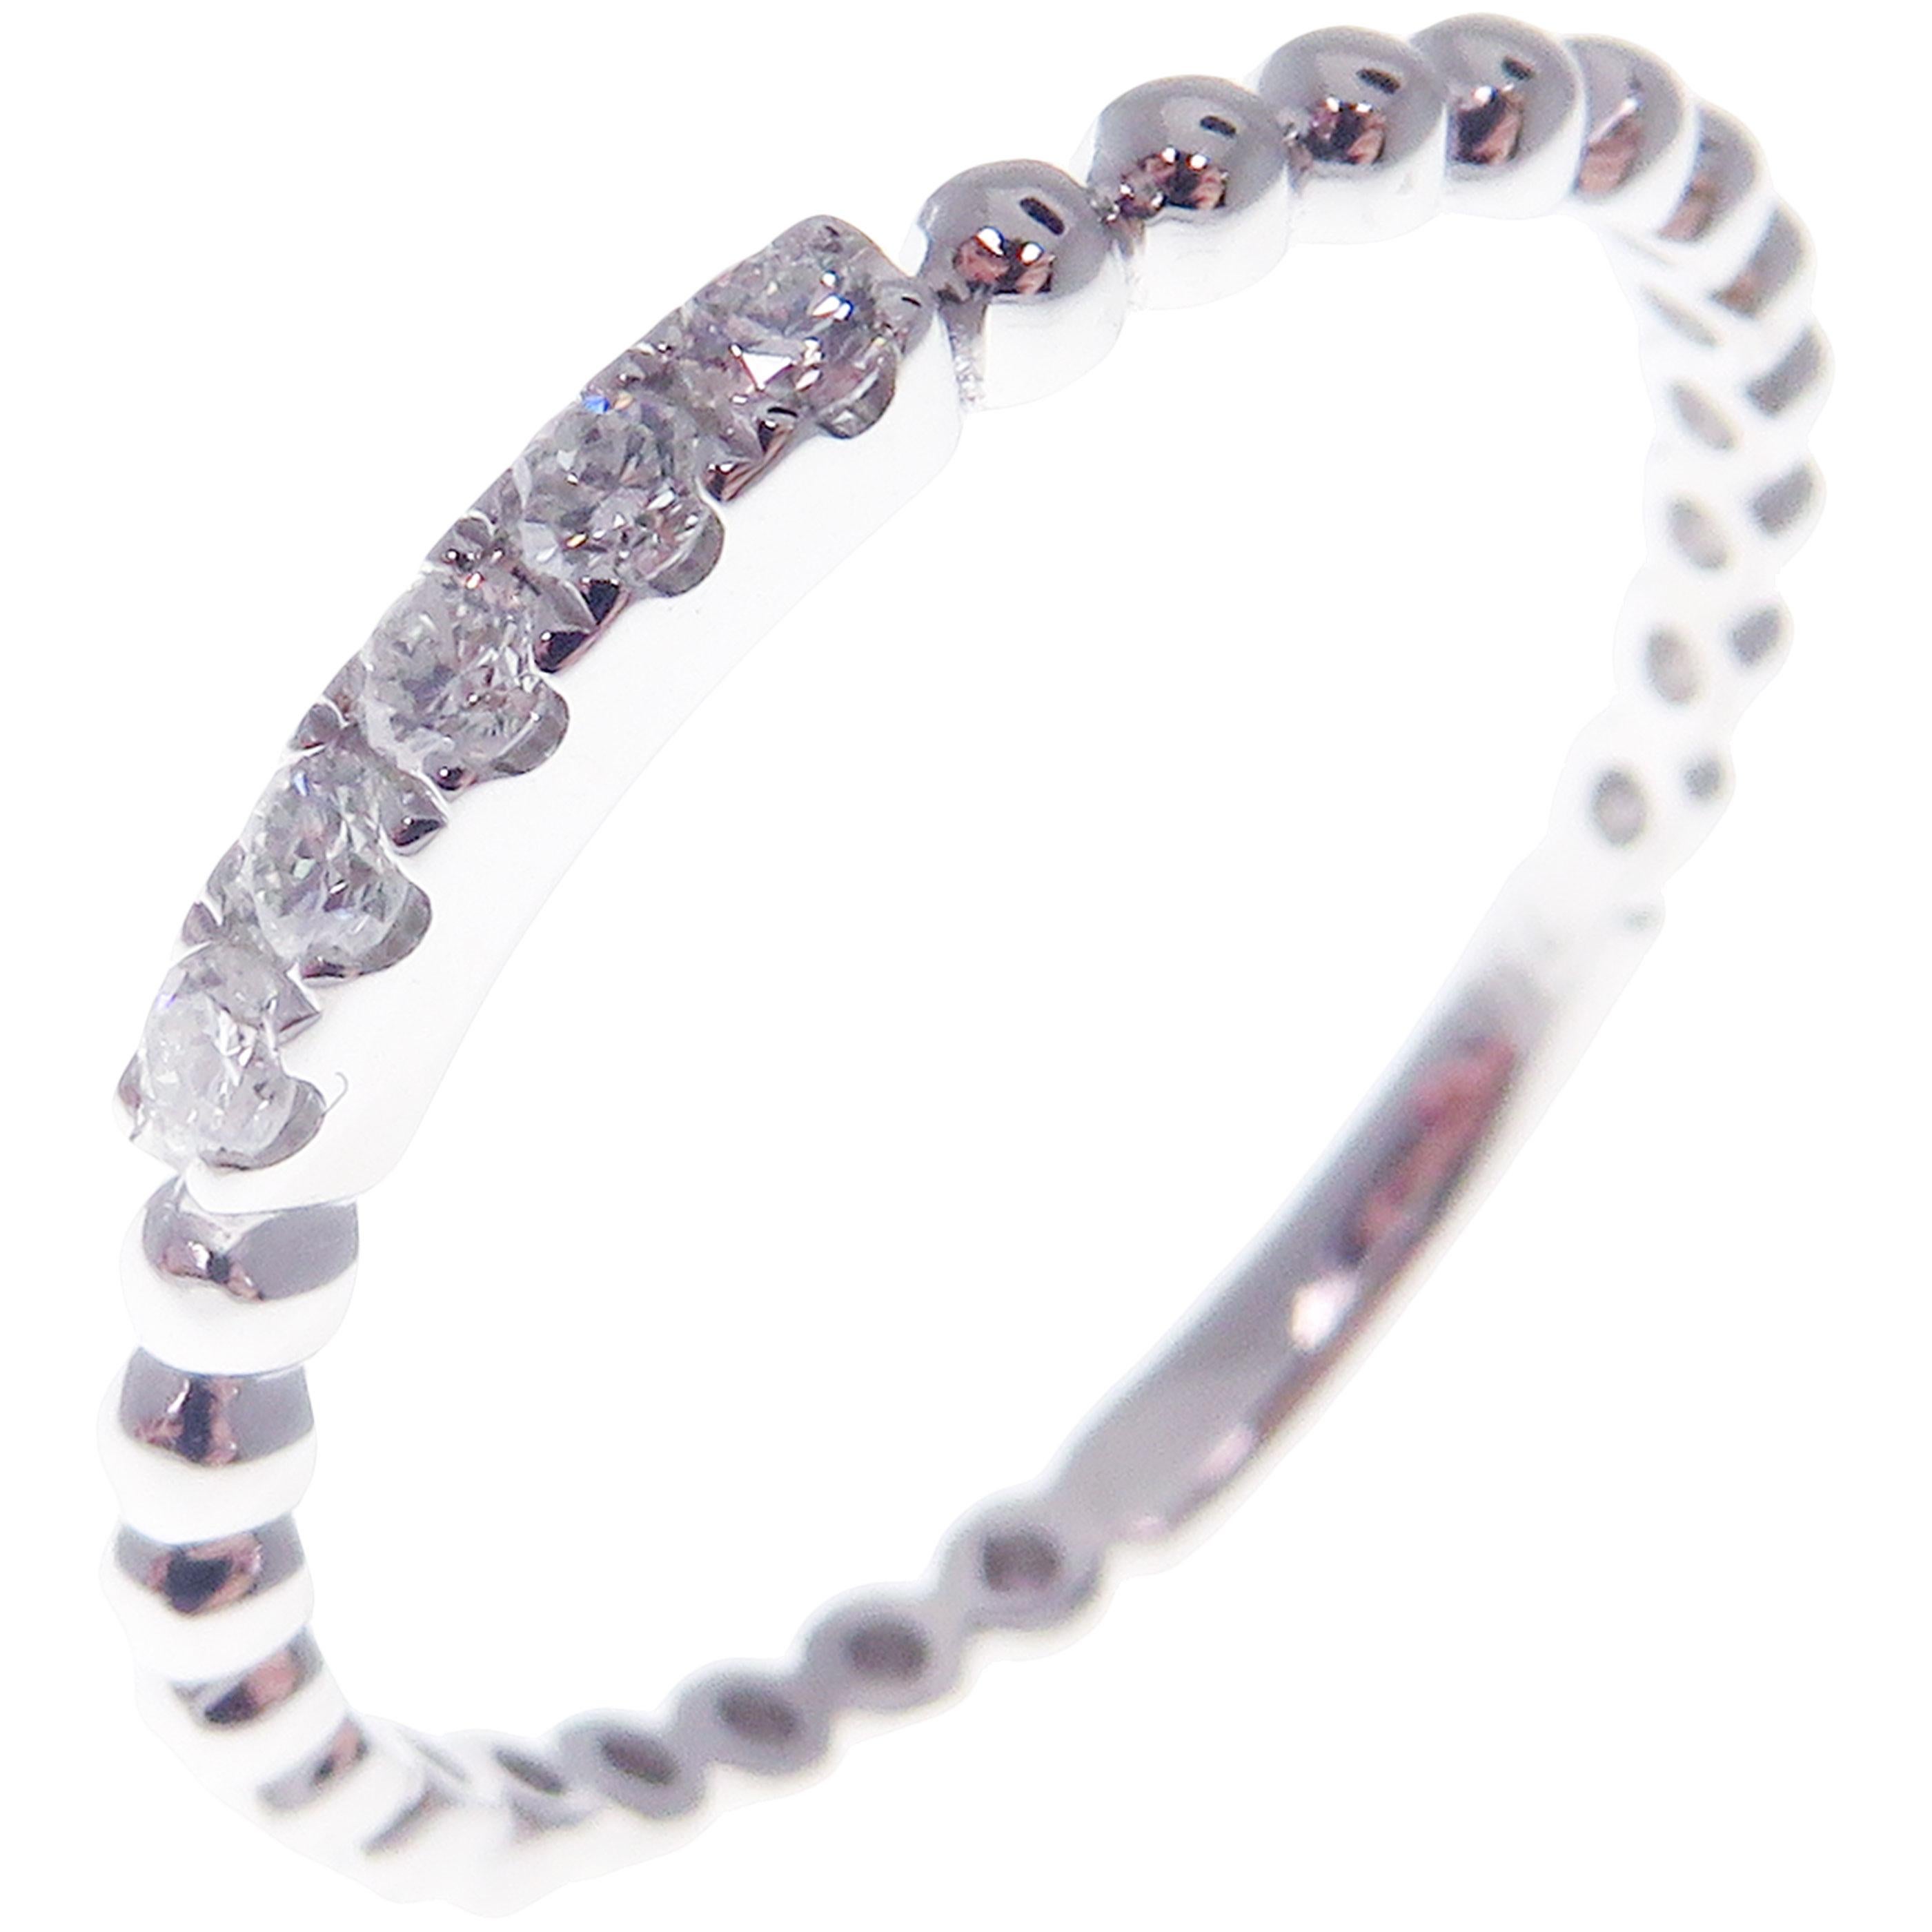 This simple stackable ring is crafted in 18-karat white gold, featuring 5 round white diamonds totaling of 0.11 carats.
Approximate total weight 1.50 grams.
Standard Ring size 7
SI-G Quality natural white diamonds.